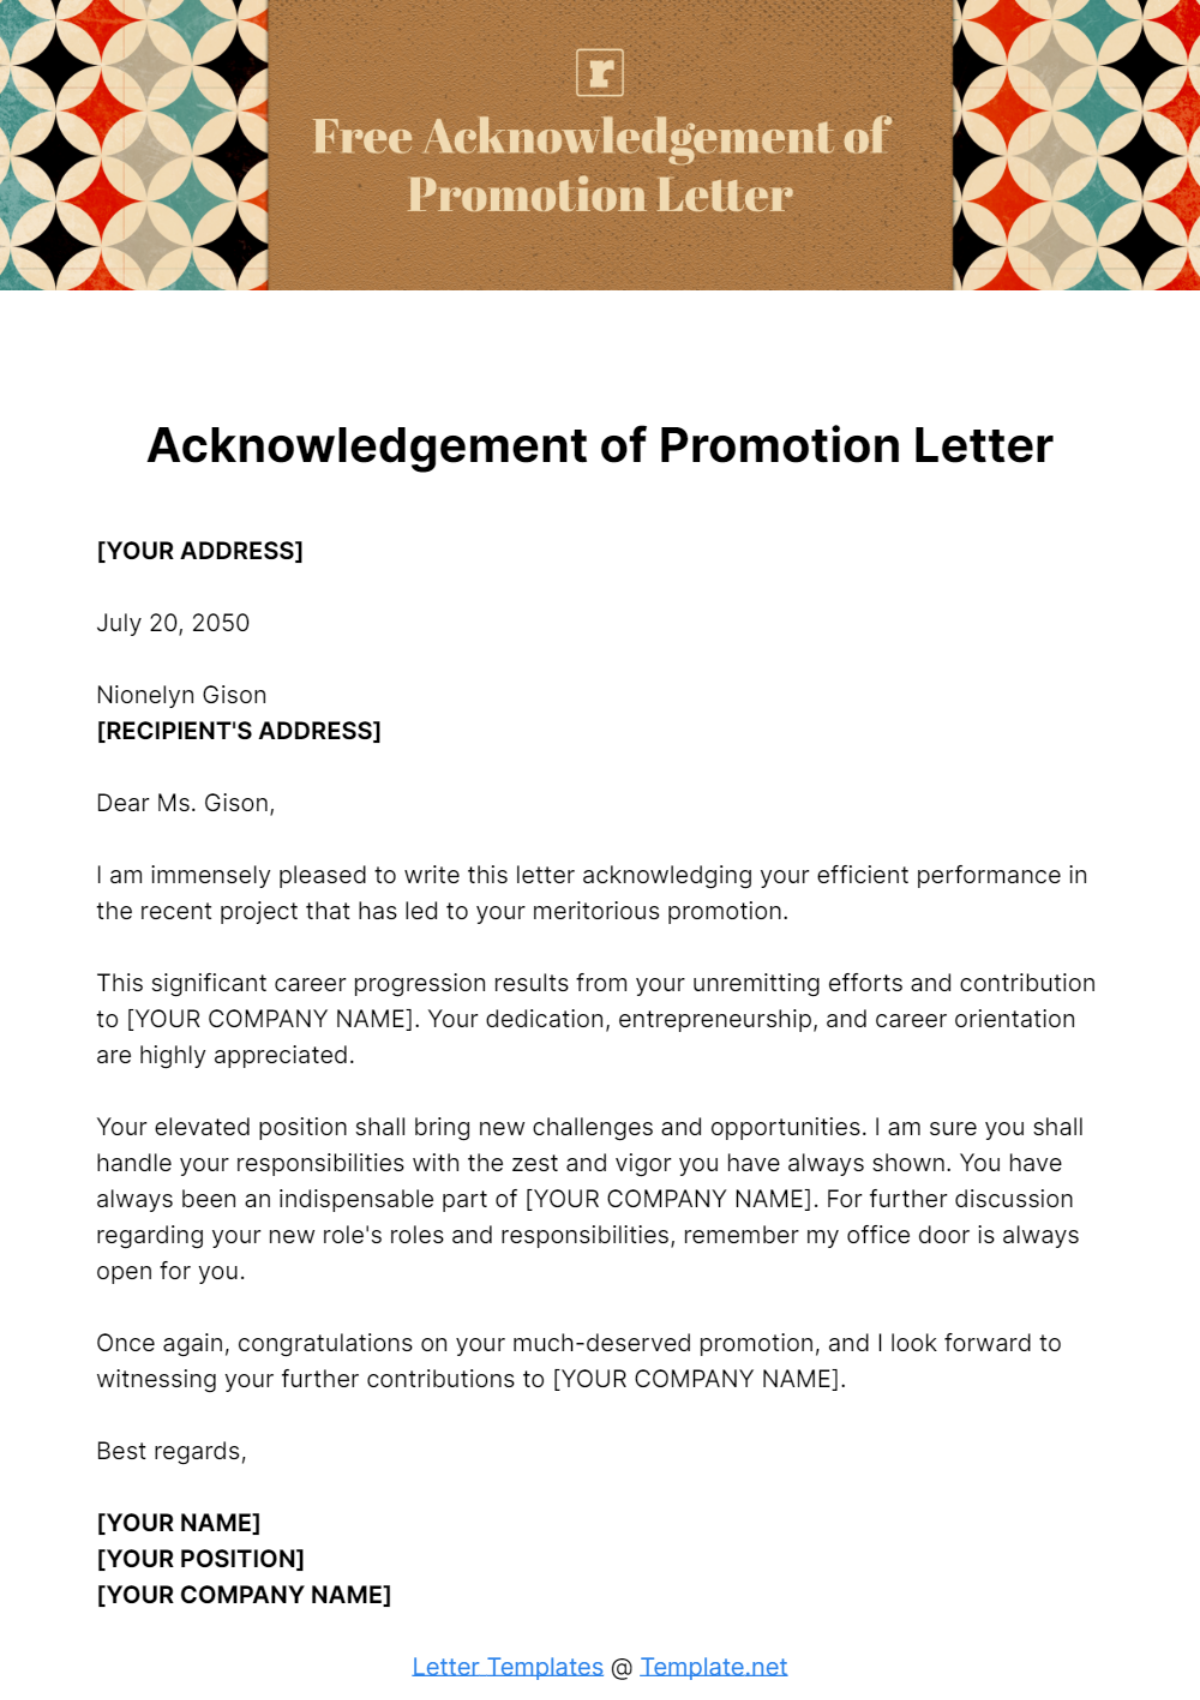 Acknowledgement of Promotion Letter Template